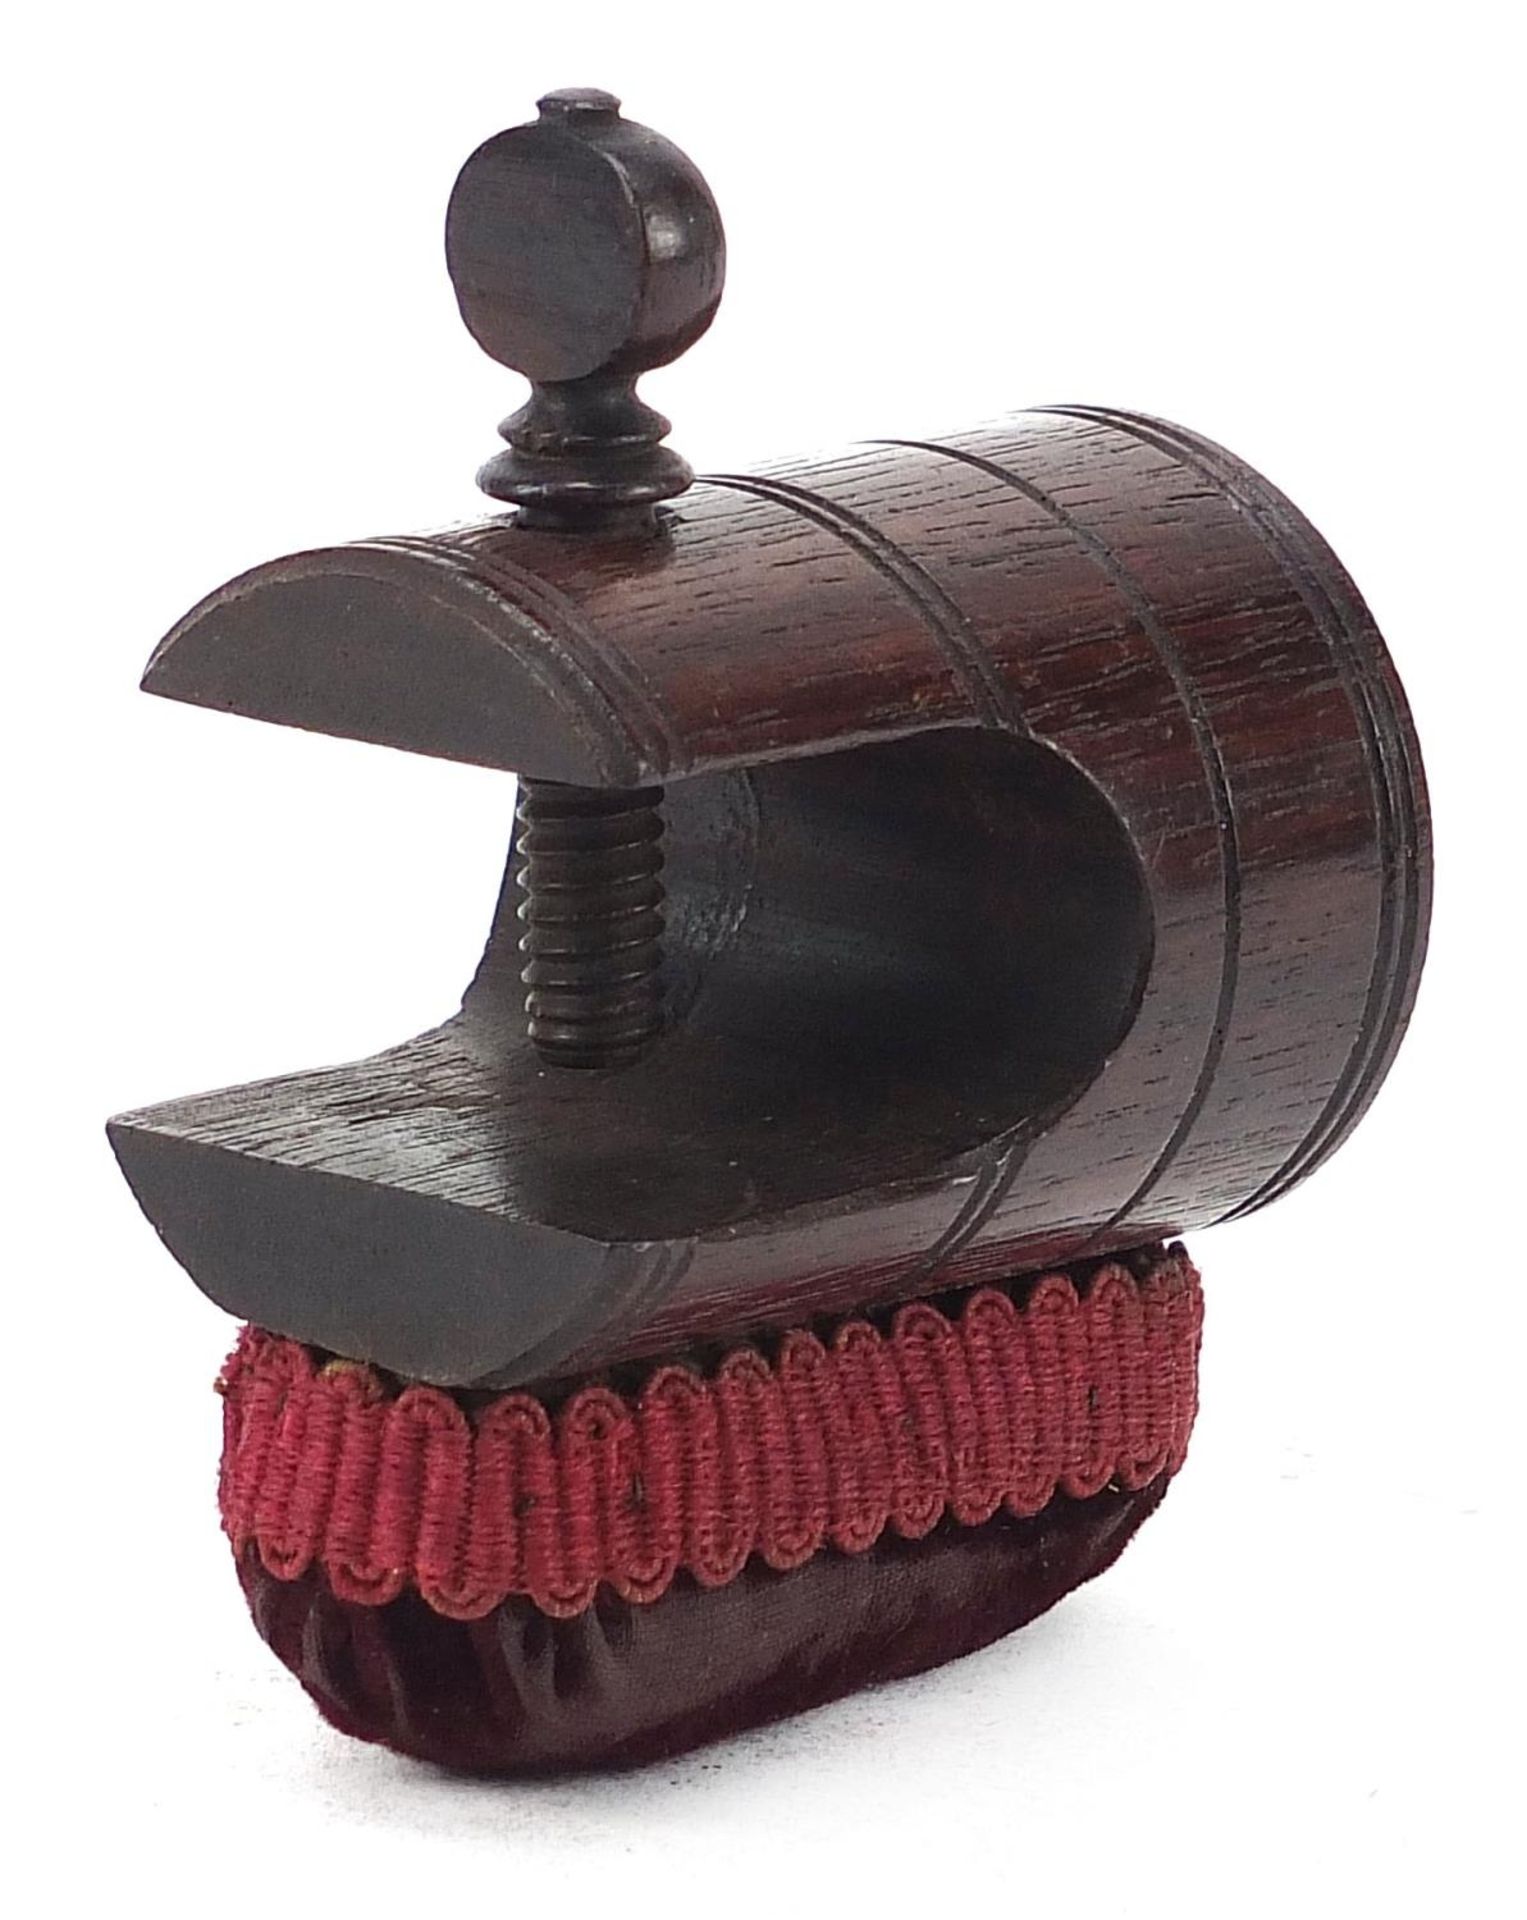 Victorian sewing interest Tunbridge Ware pin cushion in the form of a table clamp with stick ware